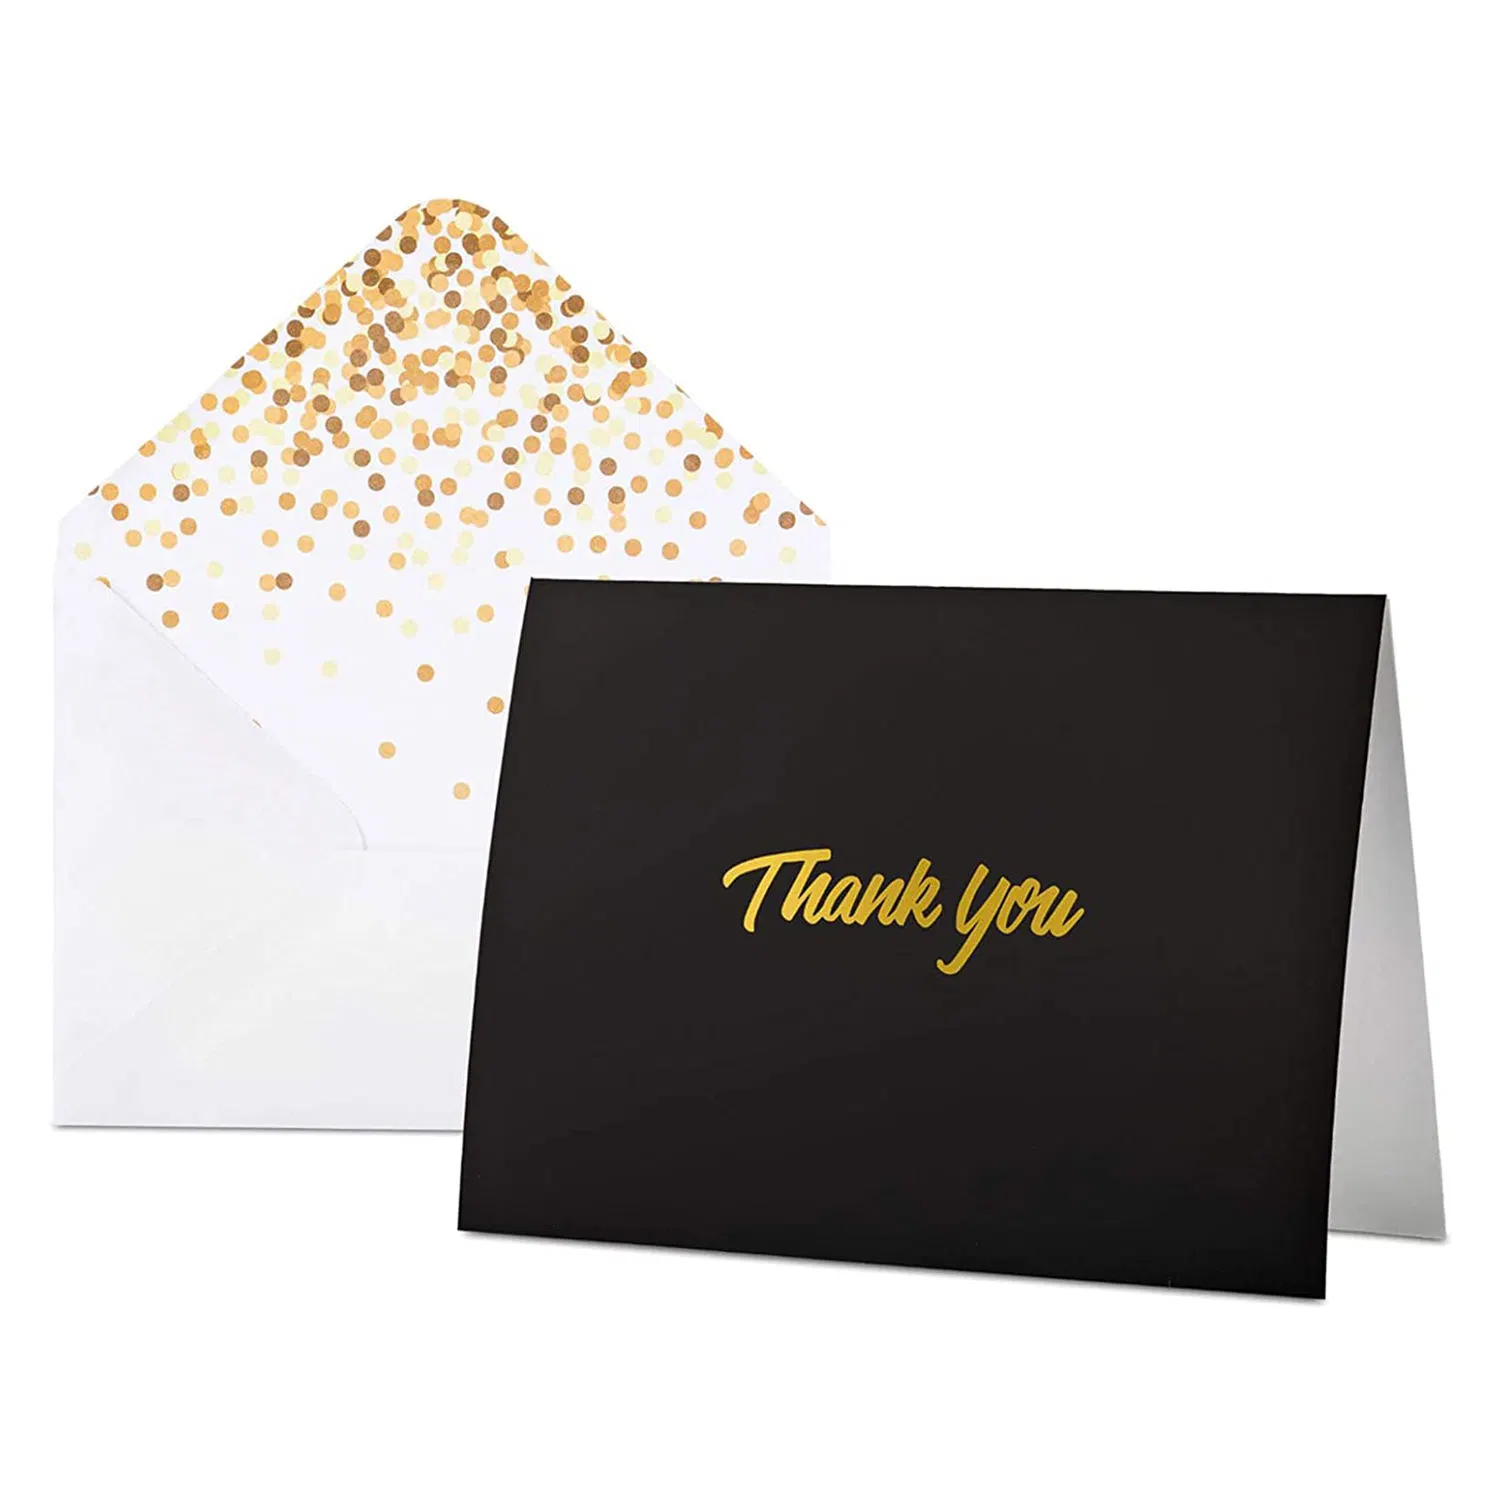 Custom Eco-Friendly Black & Gold Foil Thank You Cards with Envelopes Business Greeting Card